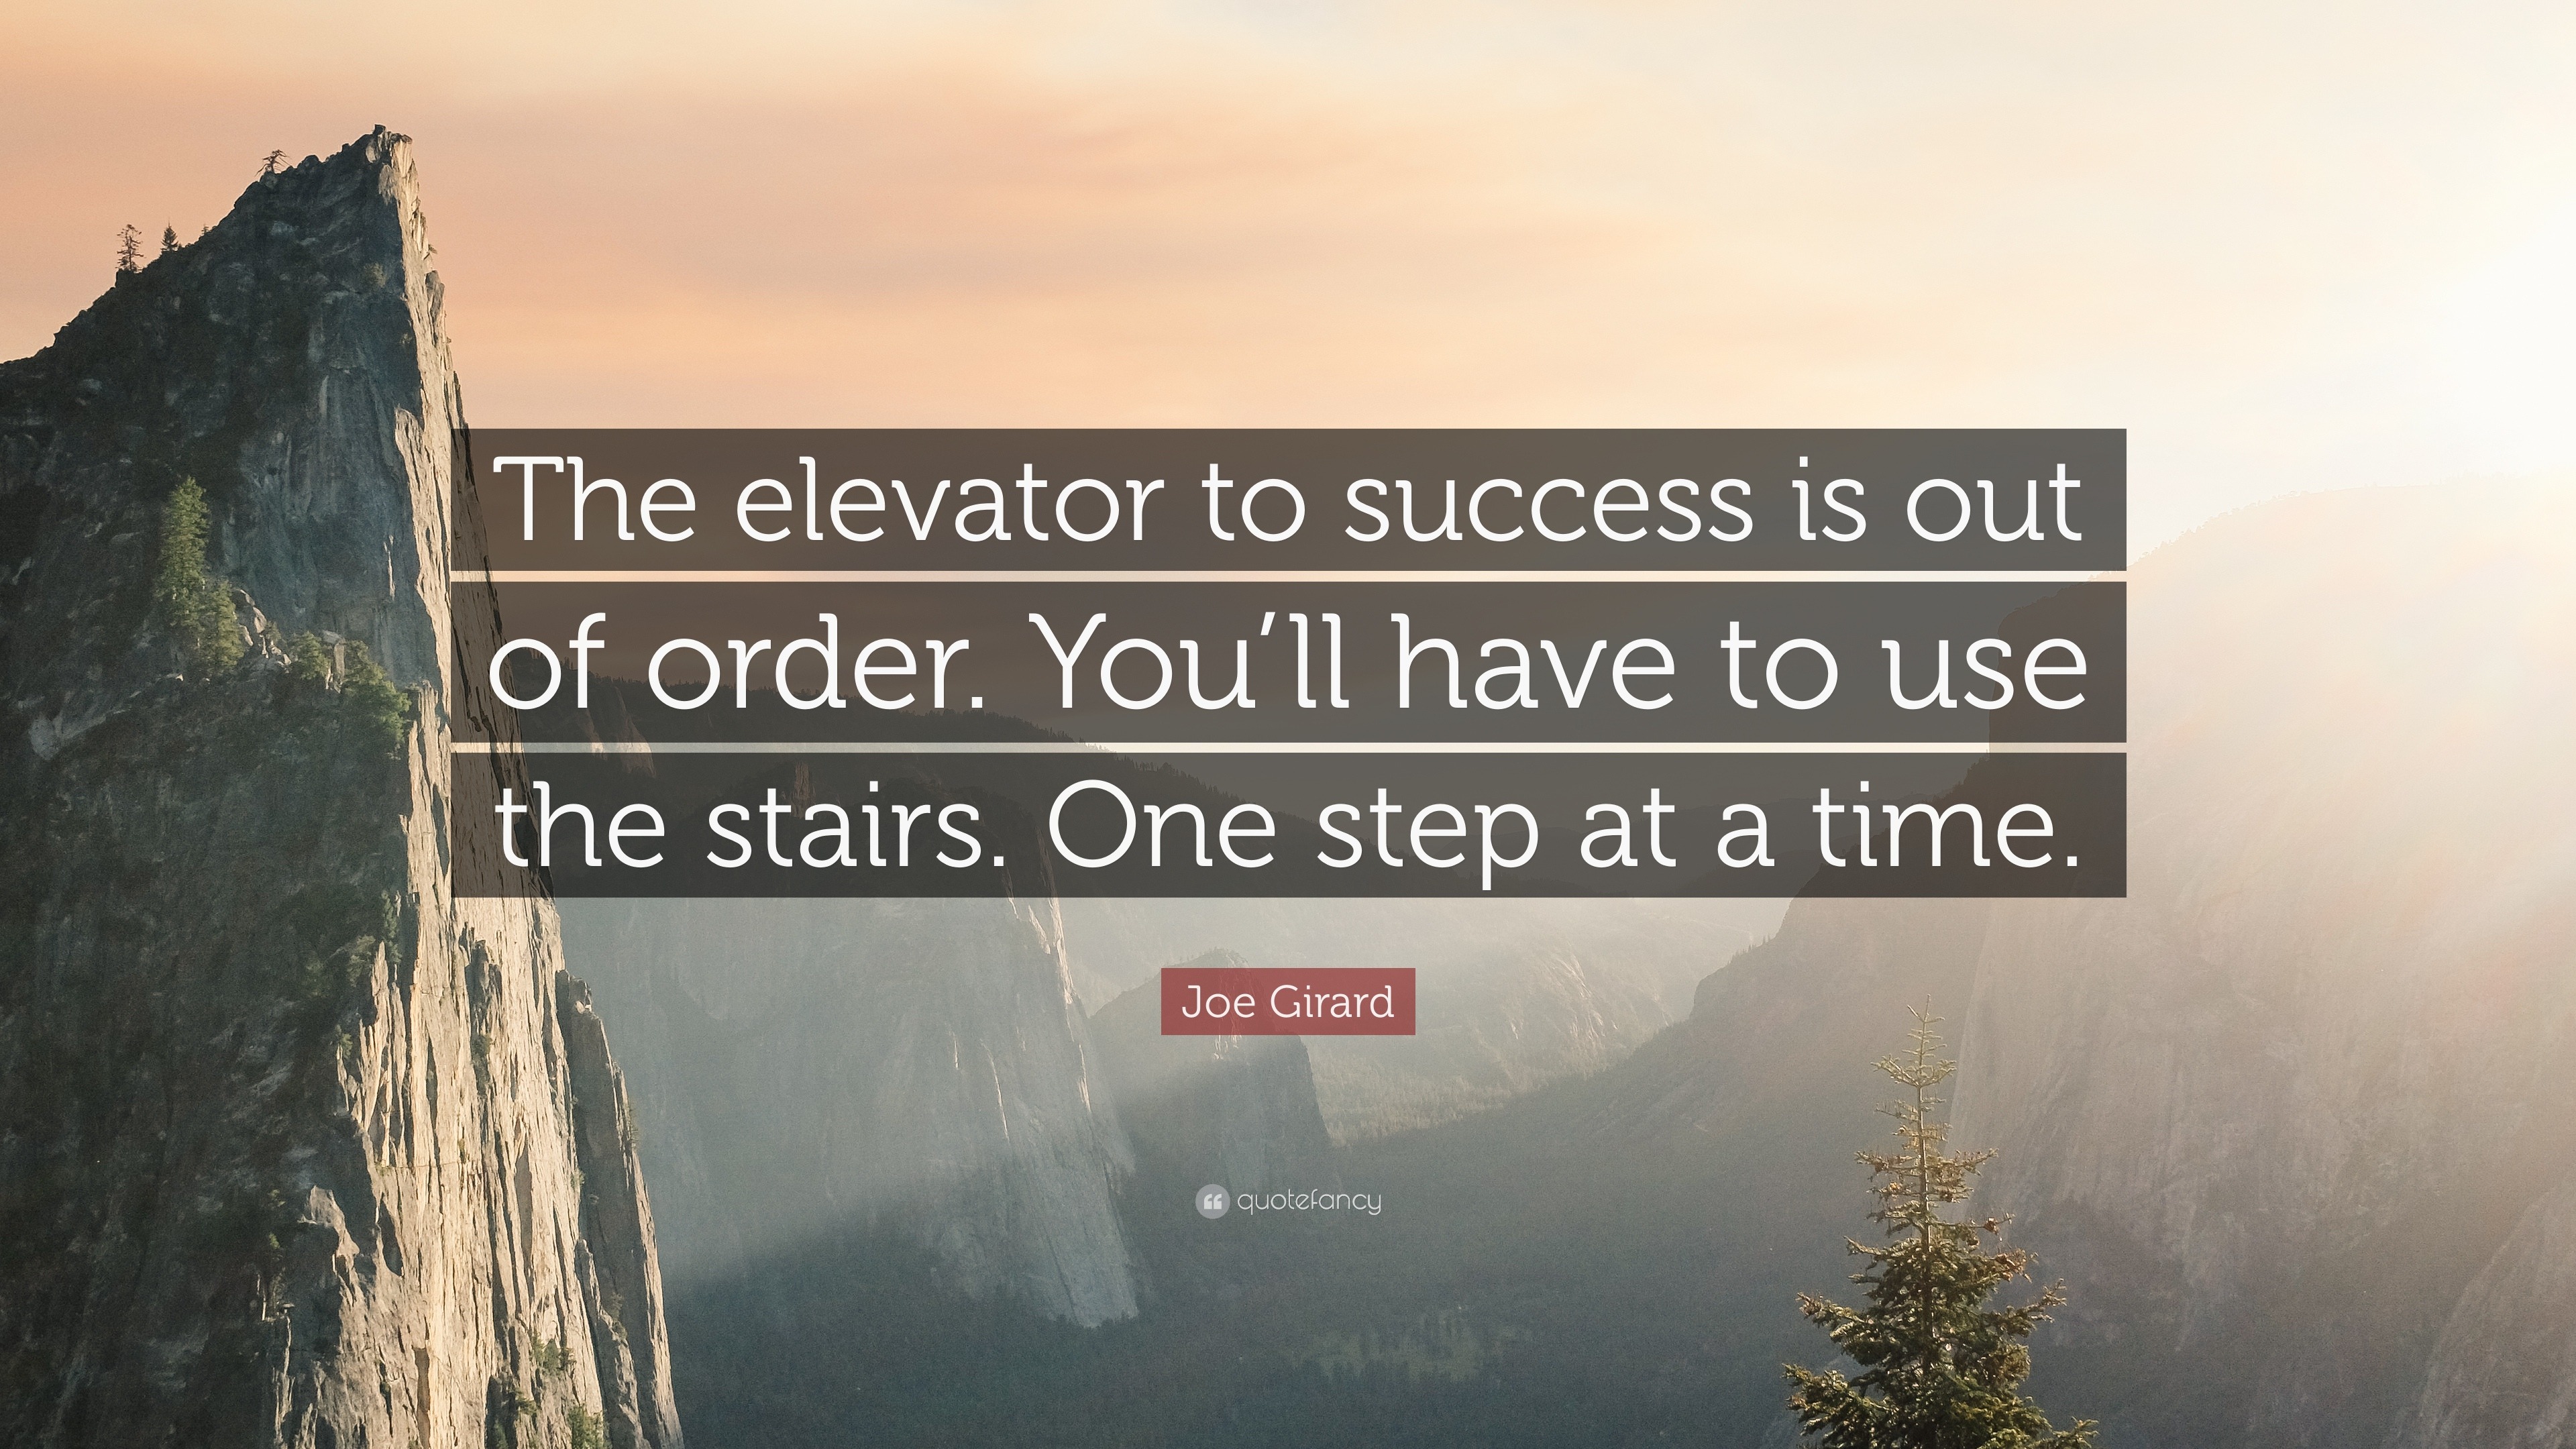 30528 Joe Girard Quote The elevator to success is out of order You ll